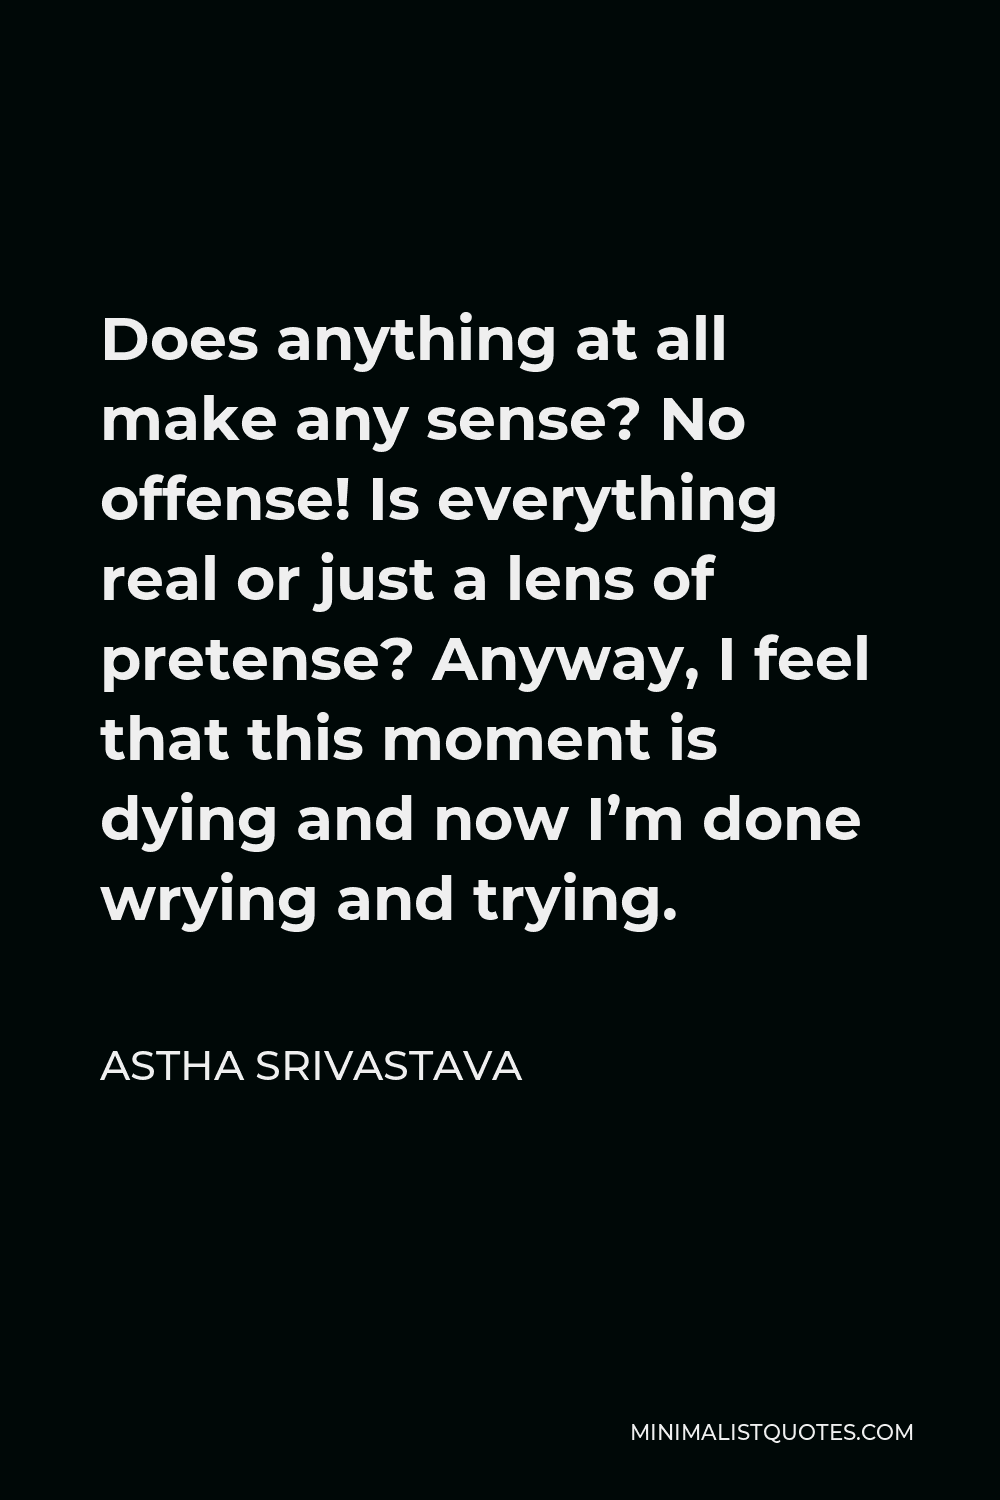 Astha Srivastava Quote - Does anything at all make any sense? No offense! Is everything real or just a lens of pretense? Anyway, I feel that this moment is dying and now I’m done wrying and trying.